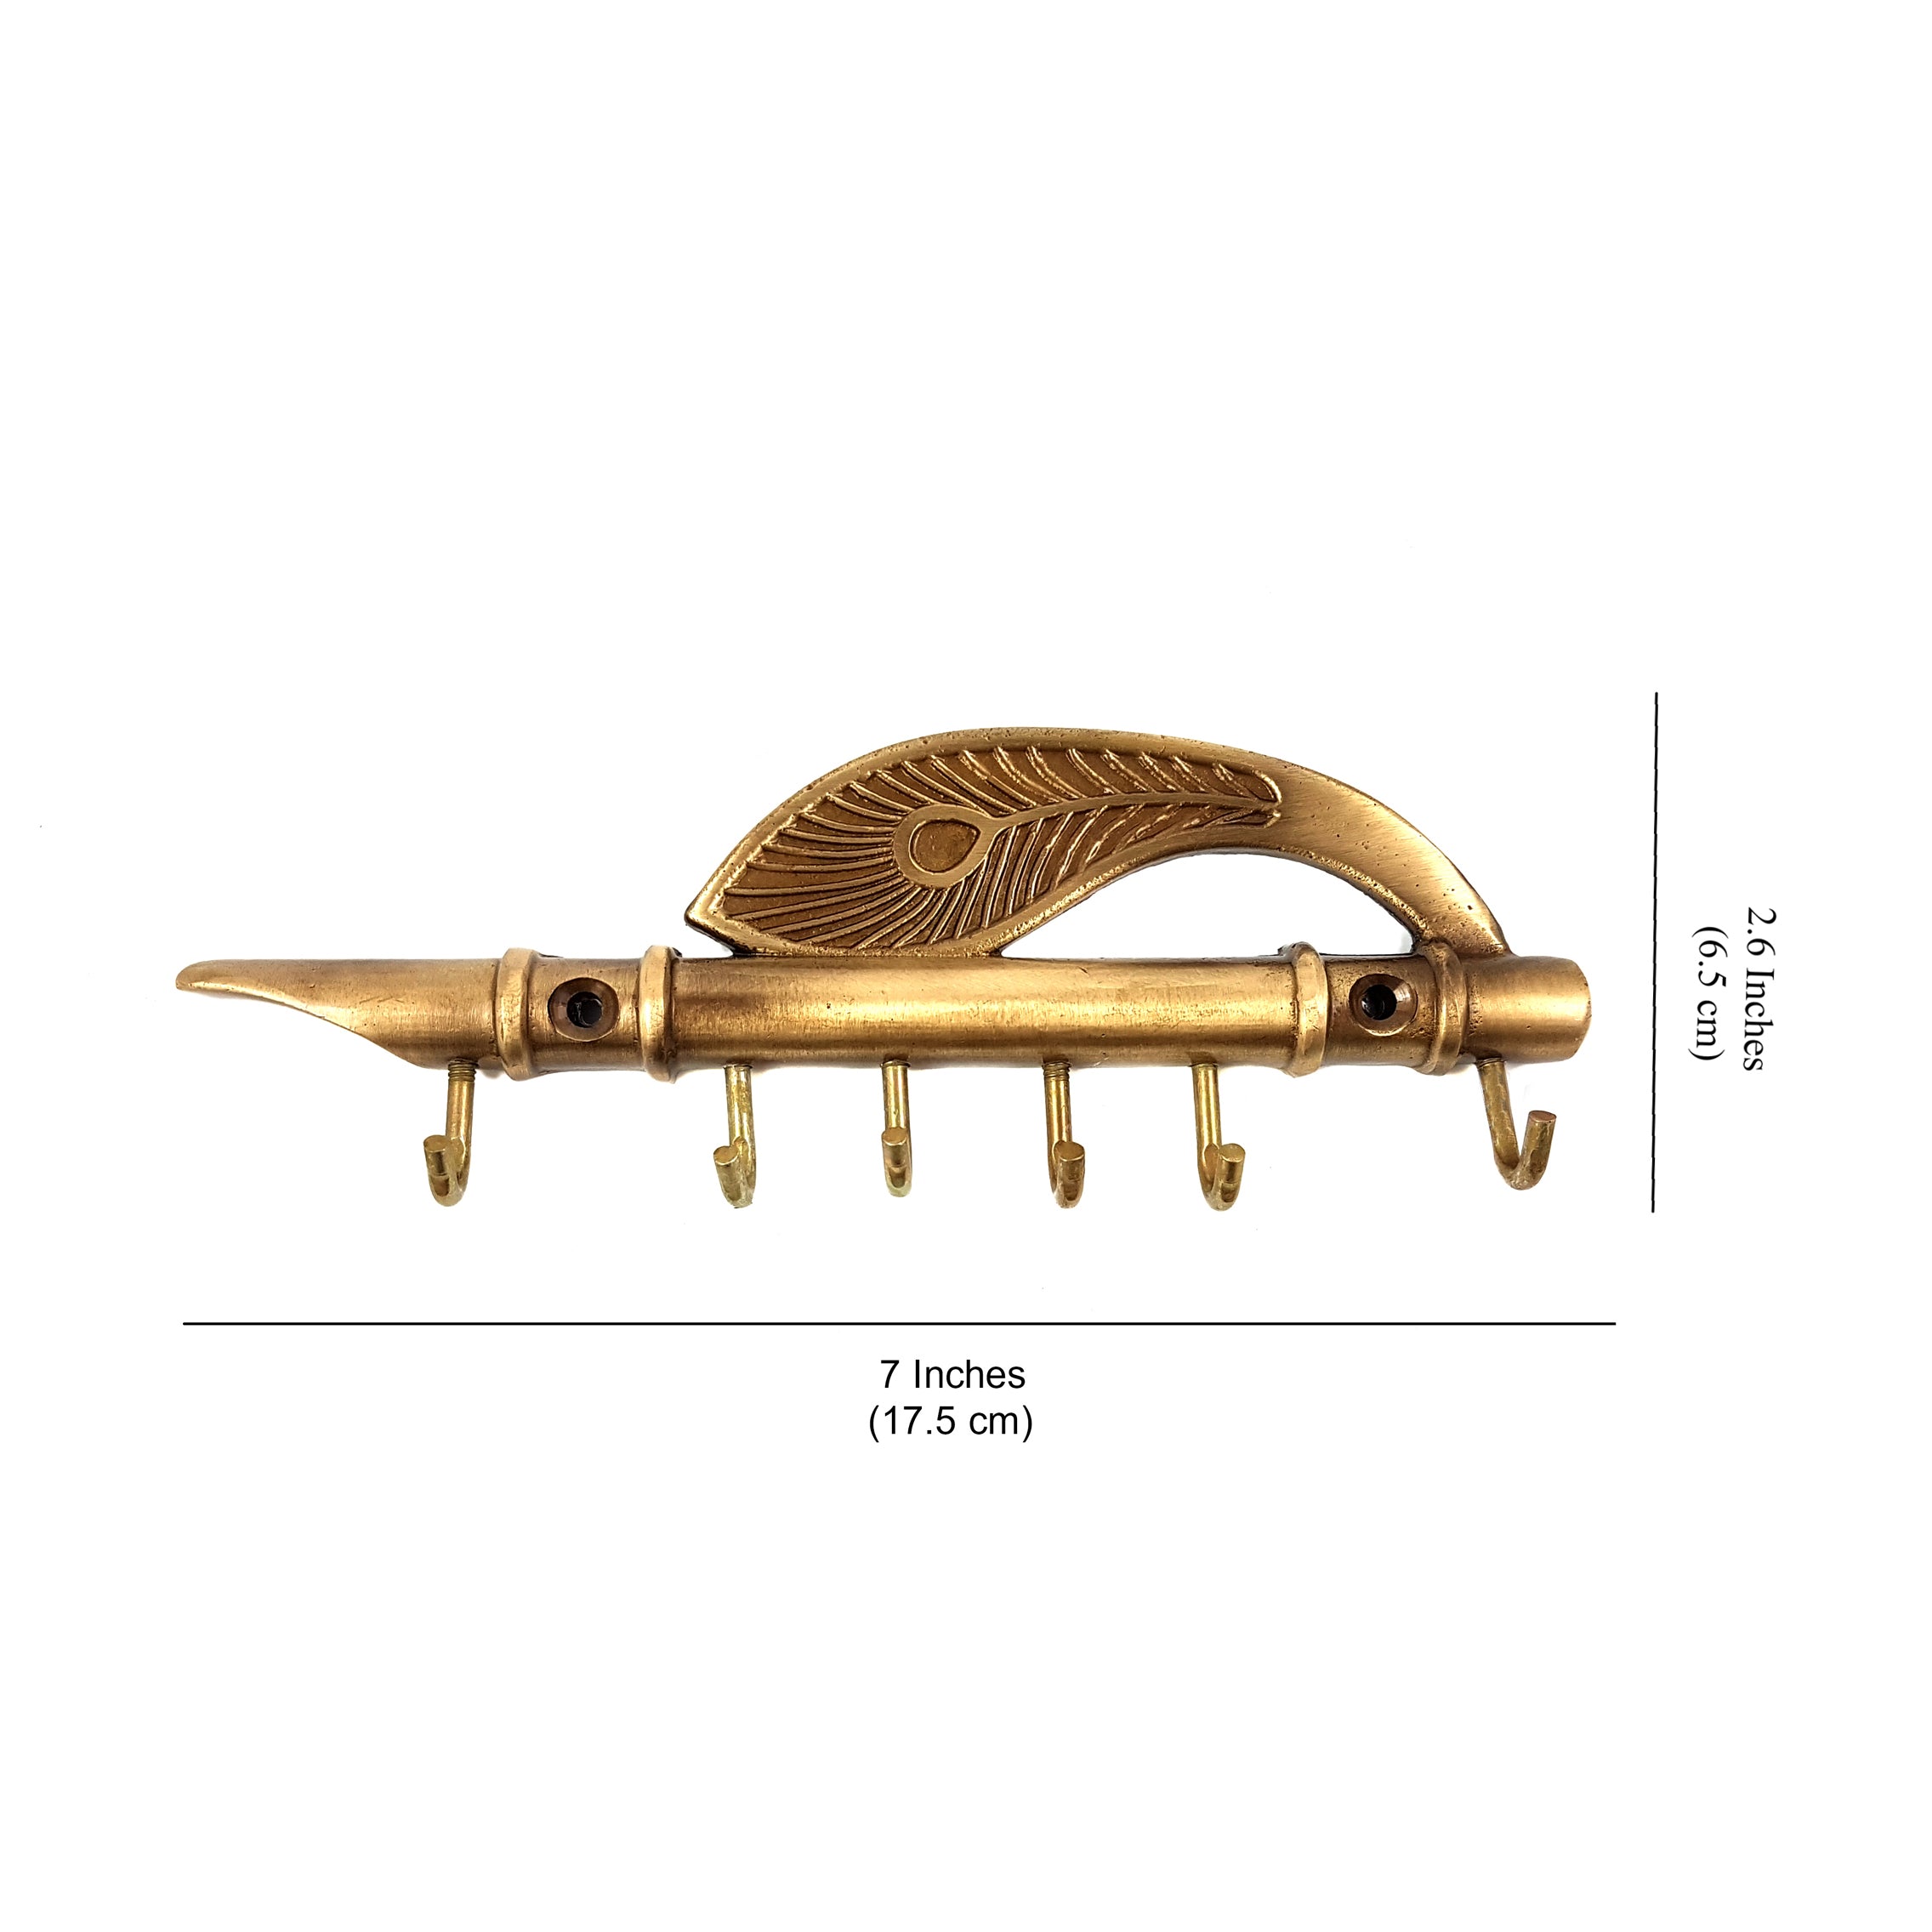 Brass Flute and Peacock Quills Key Holder with 6" Hooks for Utility and Home Decor